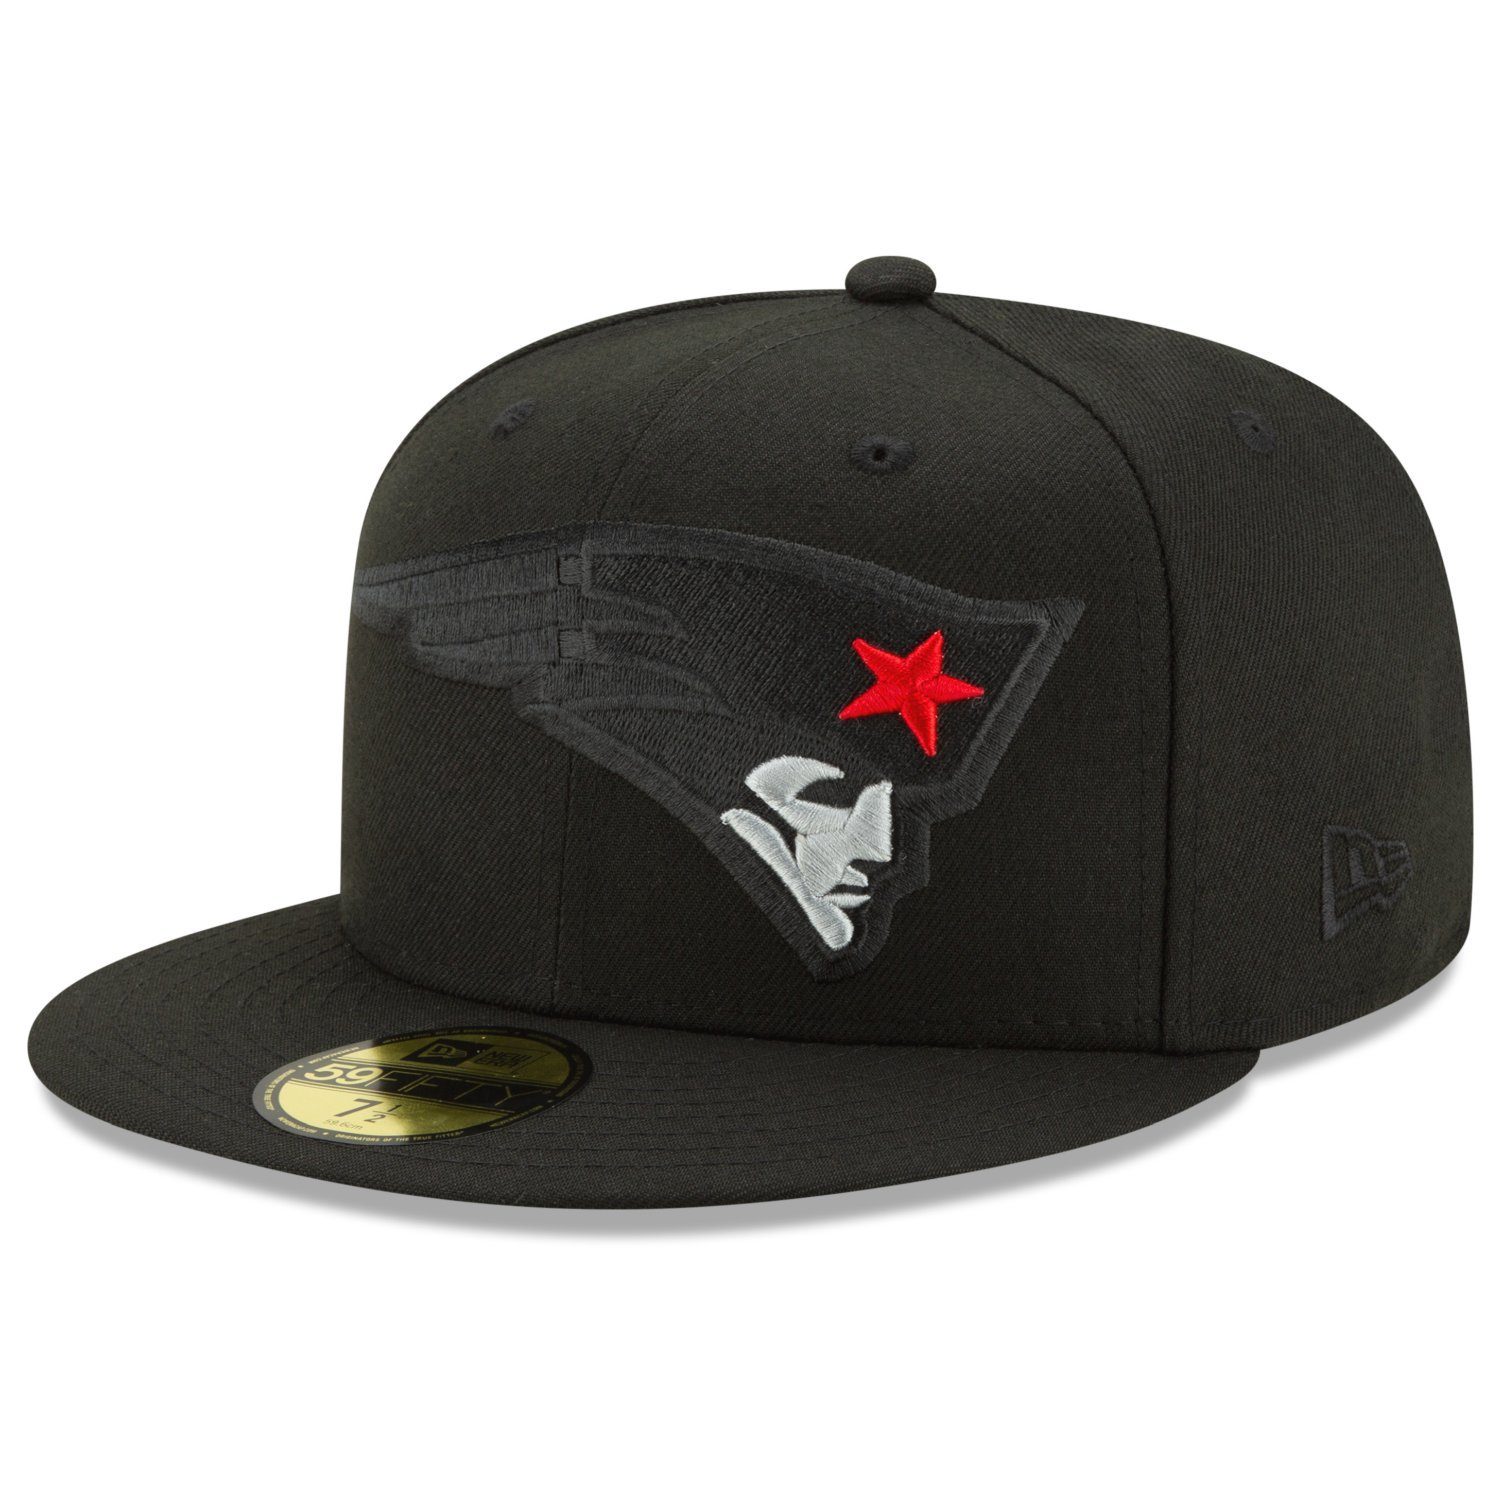 New Era Fitted Cap 59Fifty NFL ELEMENTS 2.0 New England Patriots | Fitted Caps